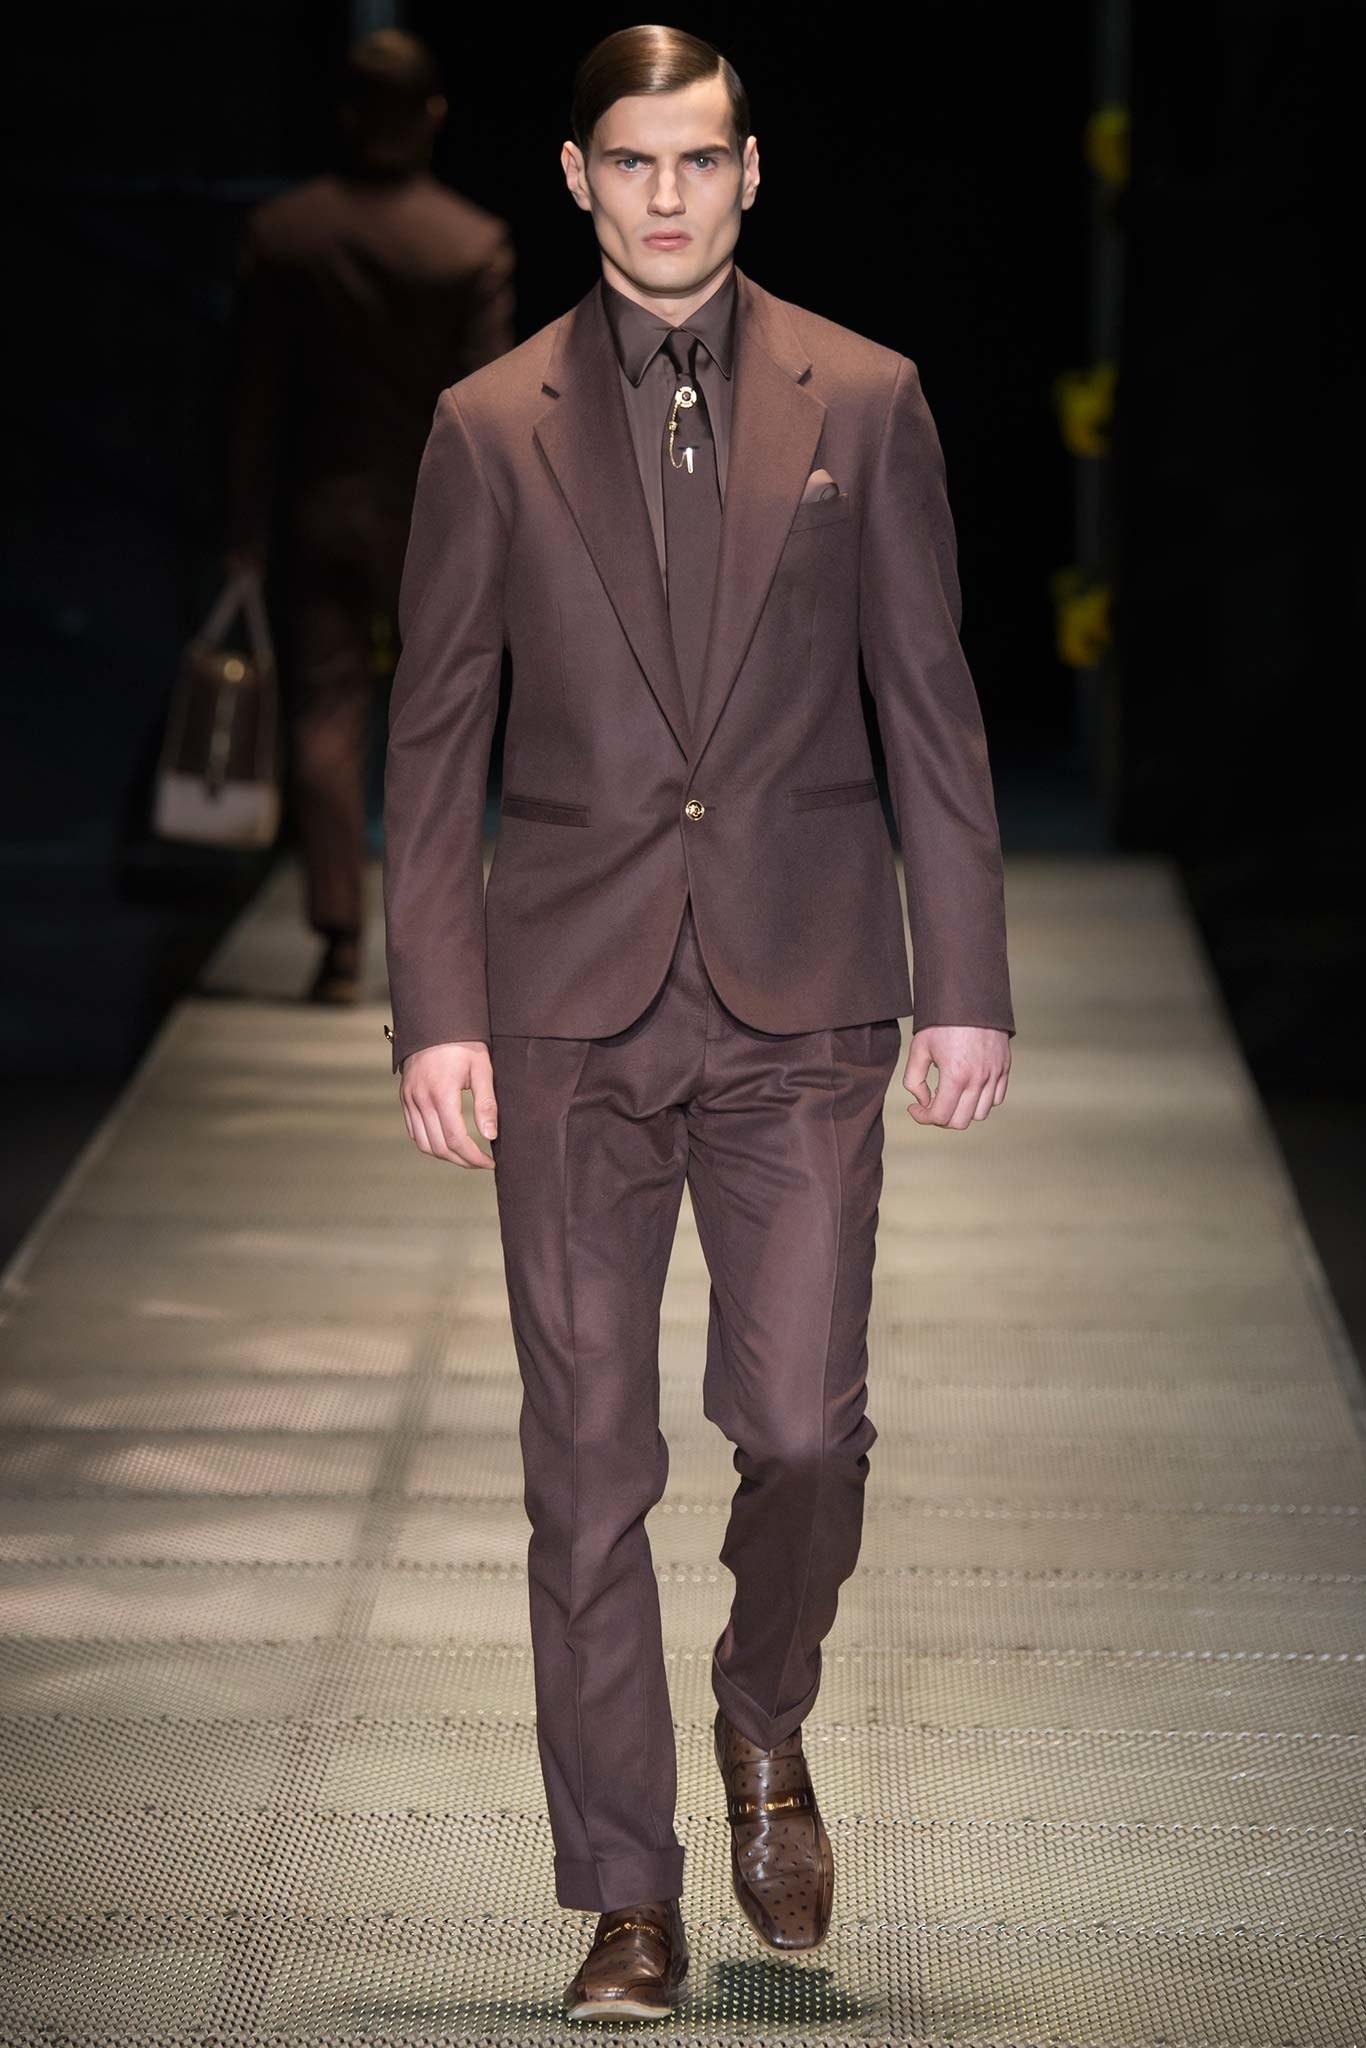 VERSACE  SUIT

Actual runway sample Fall/Winter 2015 look # 3 


Brown cashmere and silk suit 

Very soft and comfortable

One button closure

Two pockets on jacket

Gold-tone Medusa buttons



Content:  75% cashmere, 25% silk
lining:63 % viscose,